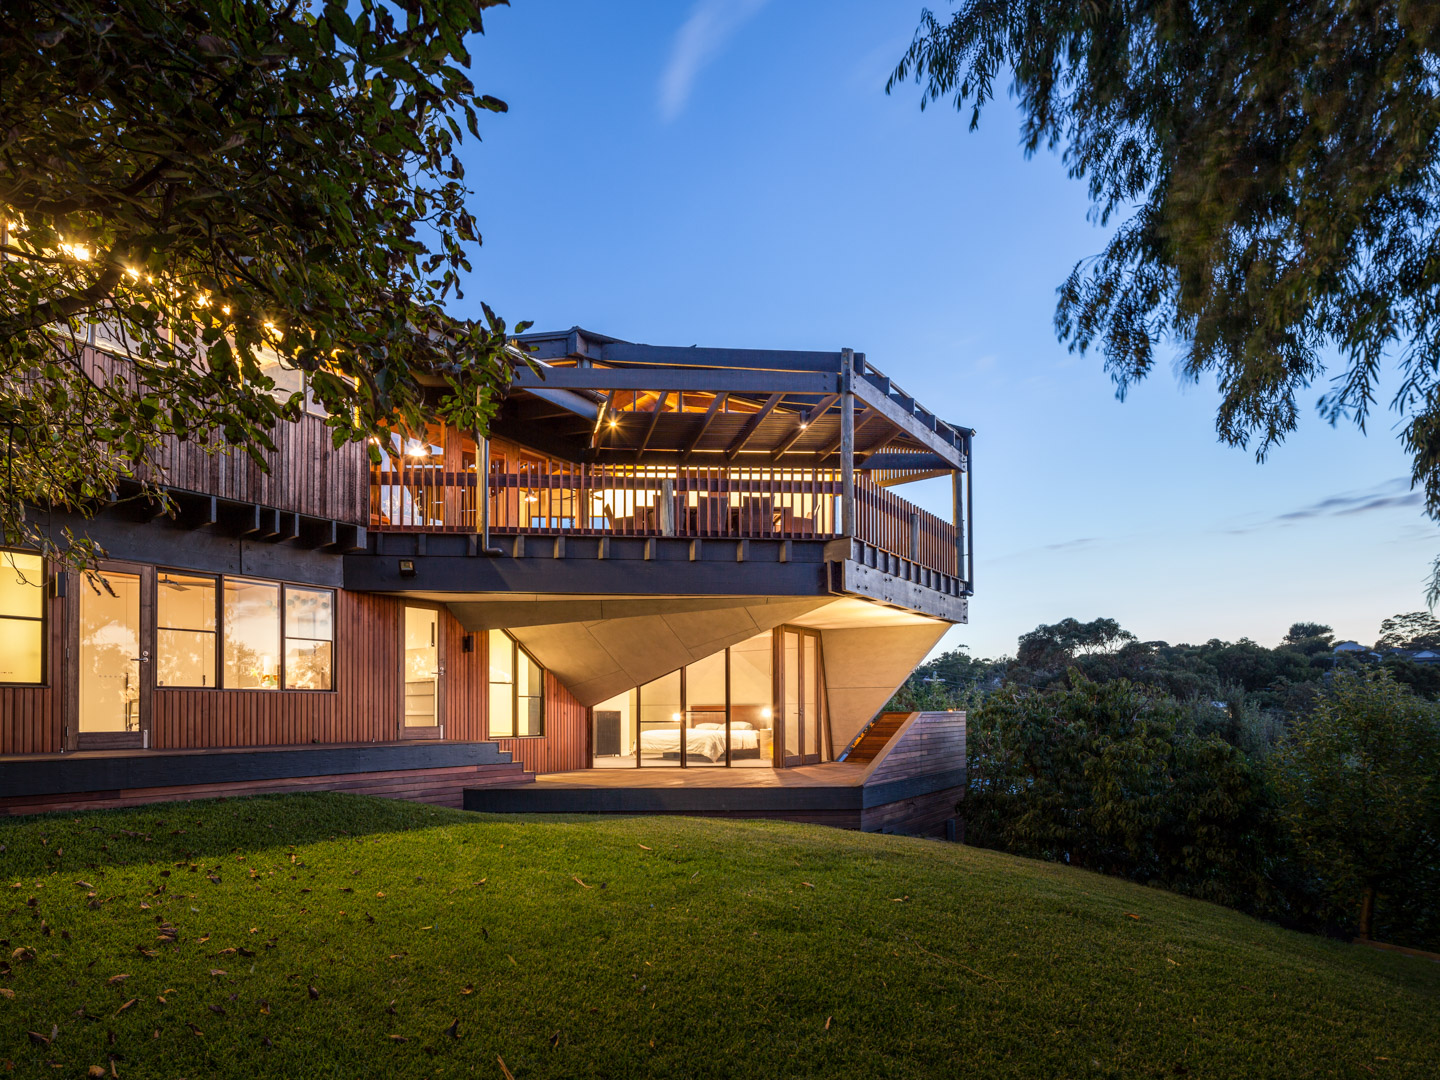 Mihaly Slocombe; Architecture; House; Renovation; Kevin Borland; Evening